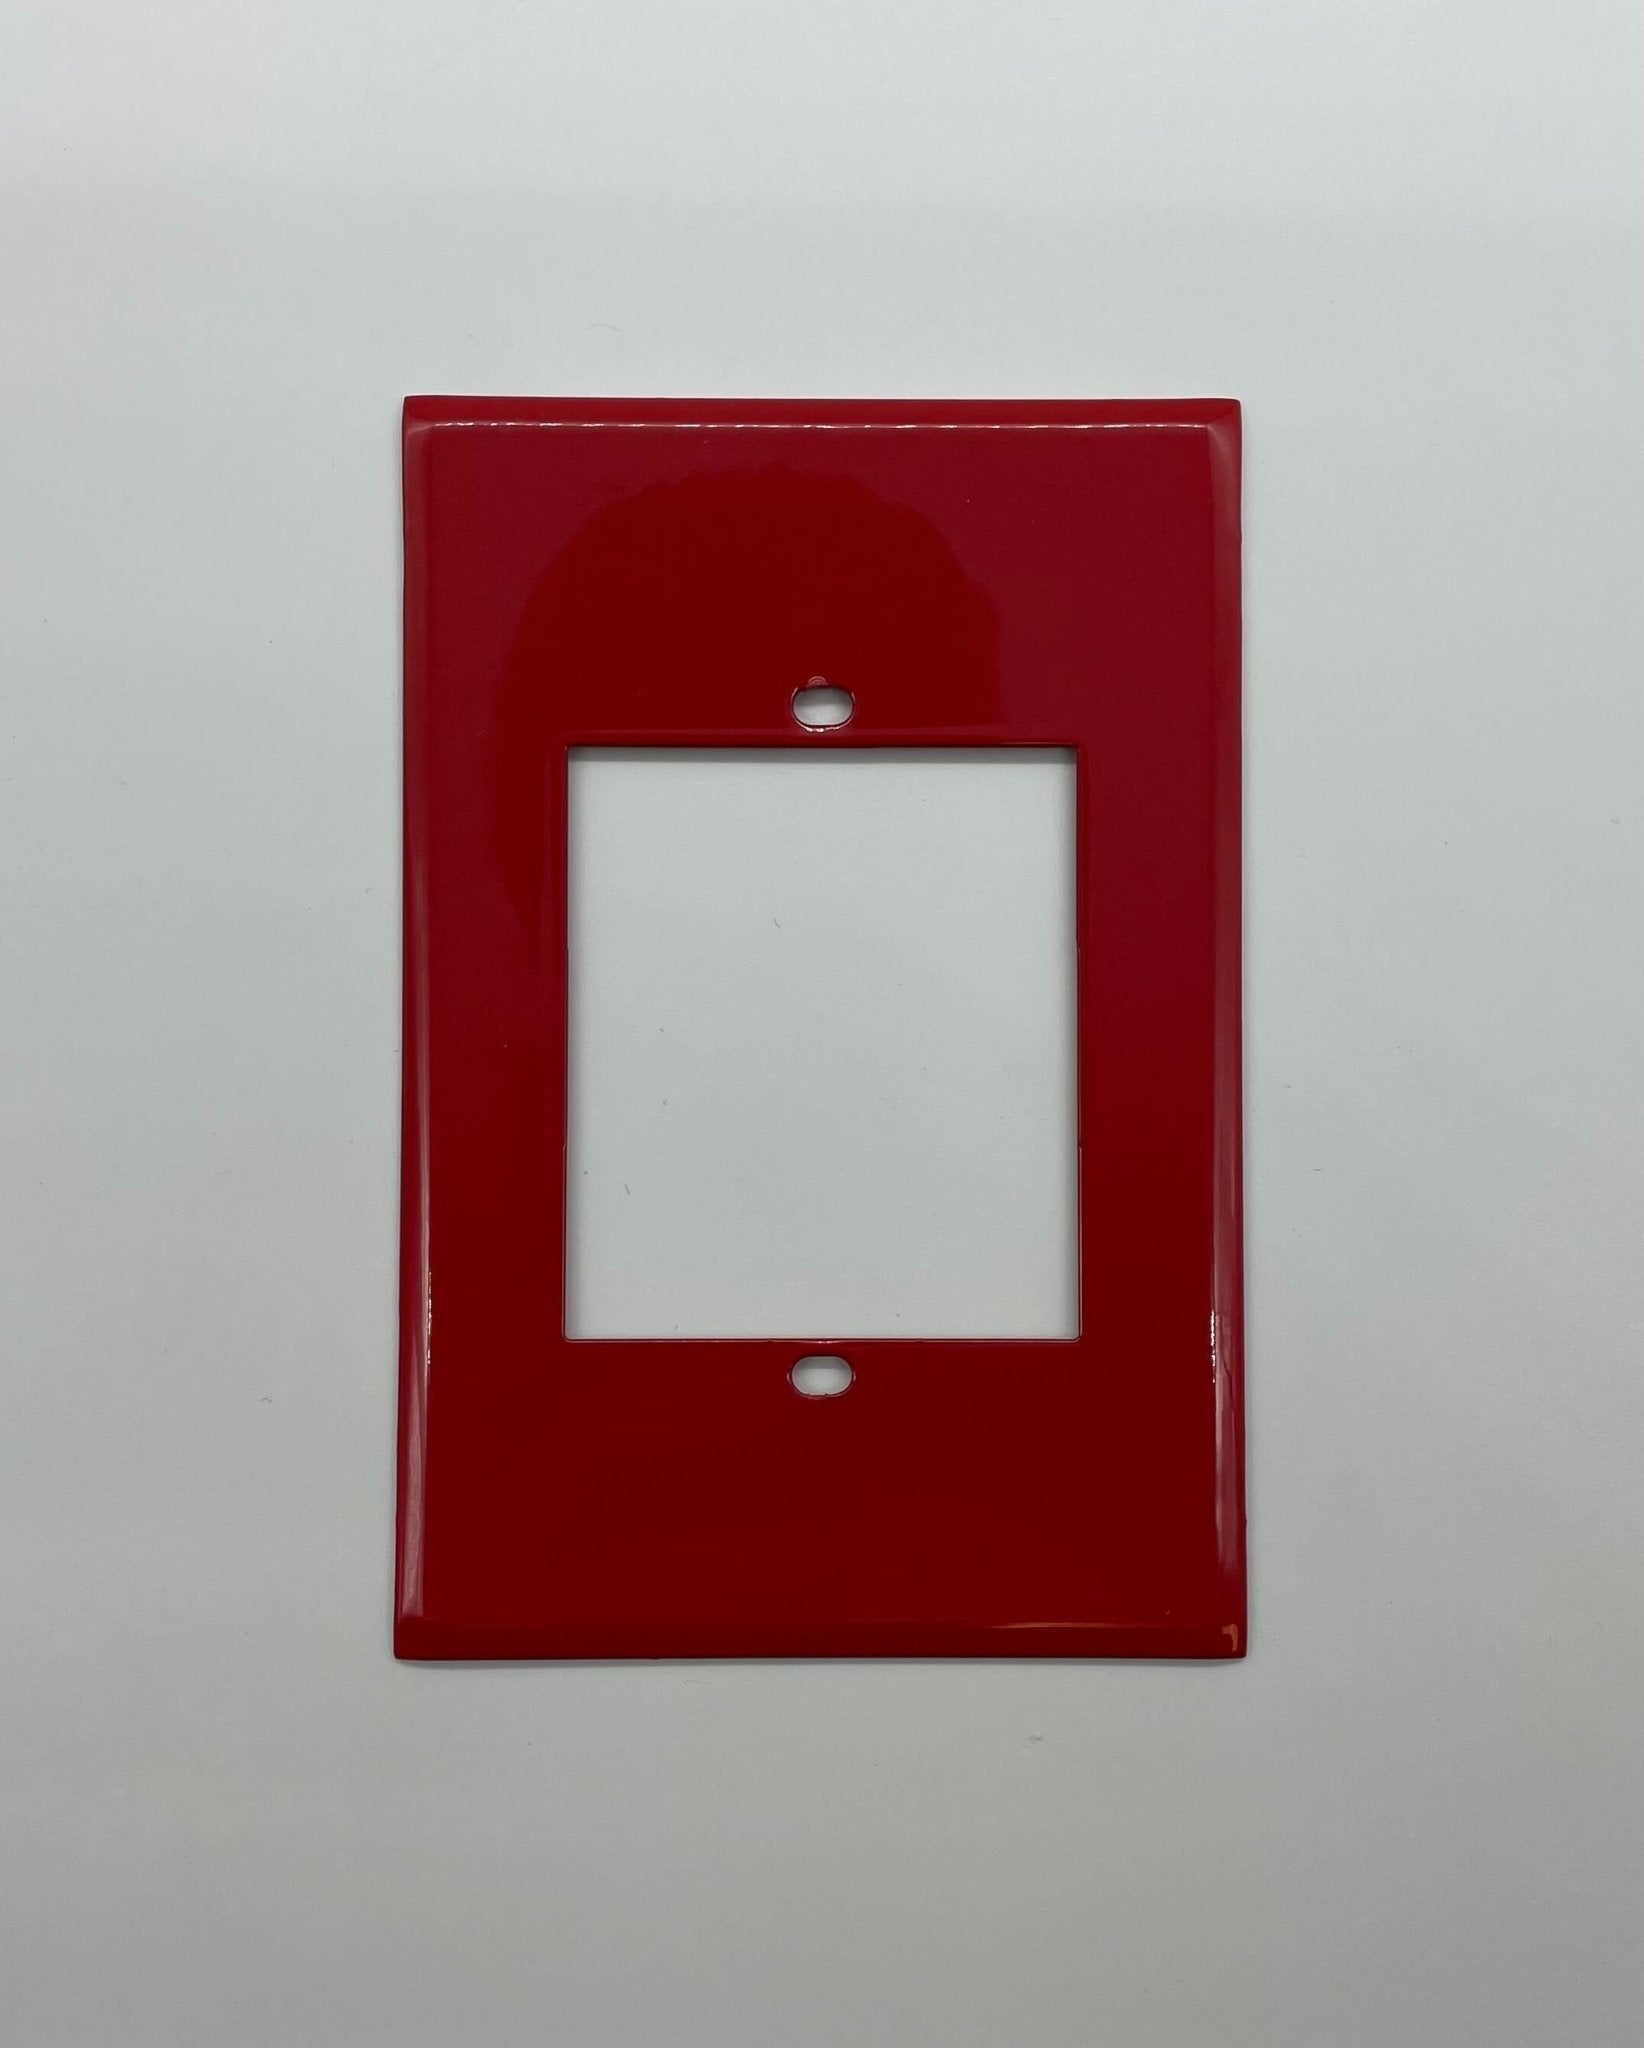 Silent Knight SD500-PSBP Station Backplate - The Fire Alarm Supplier